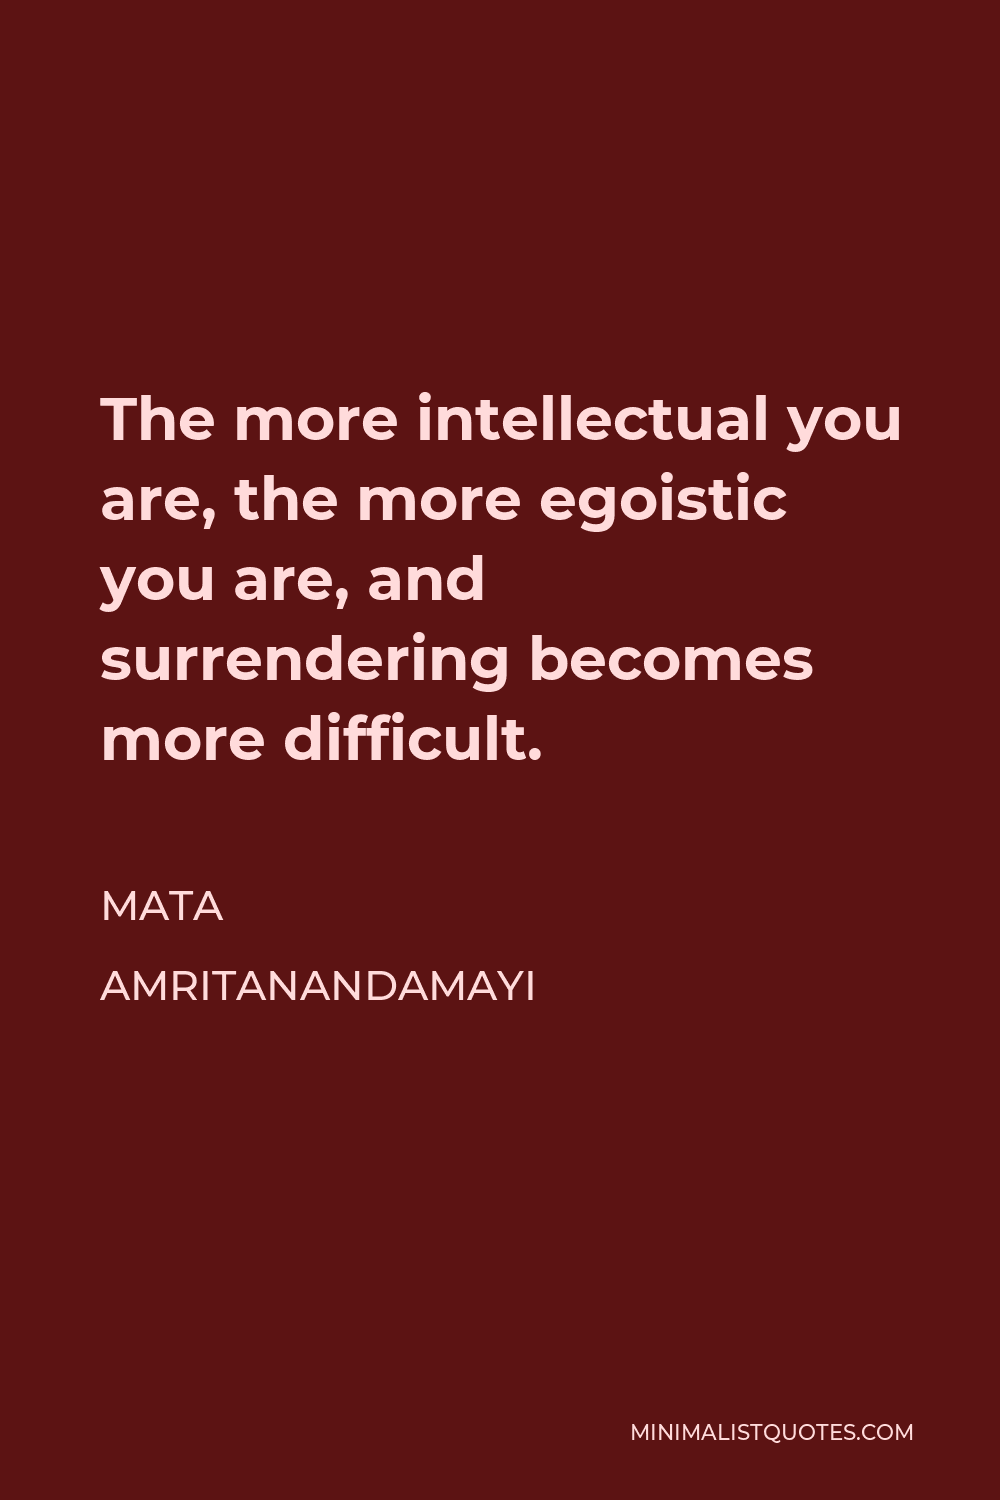 Mata Amritanandamayi Quote - The more intellectual you are, the more egoistic you are, and surrendering becomes more difficult.